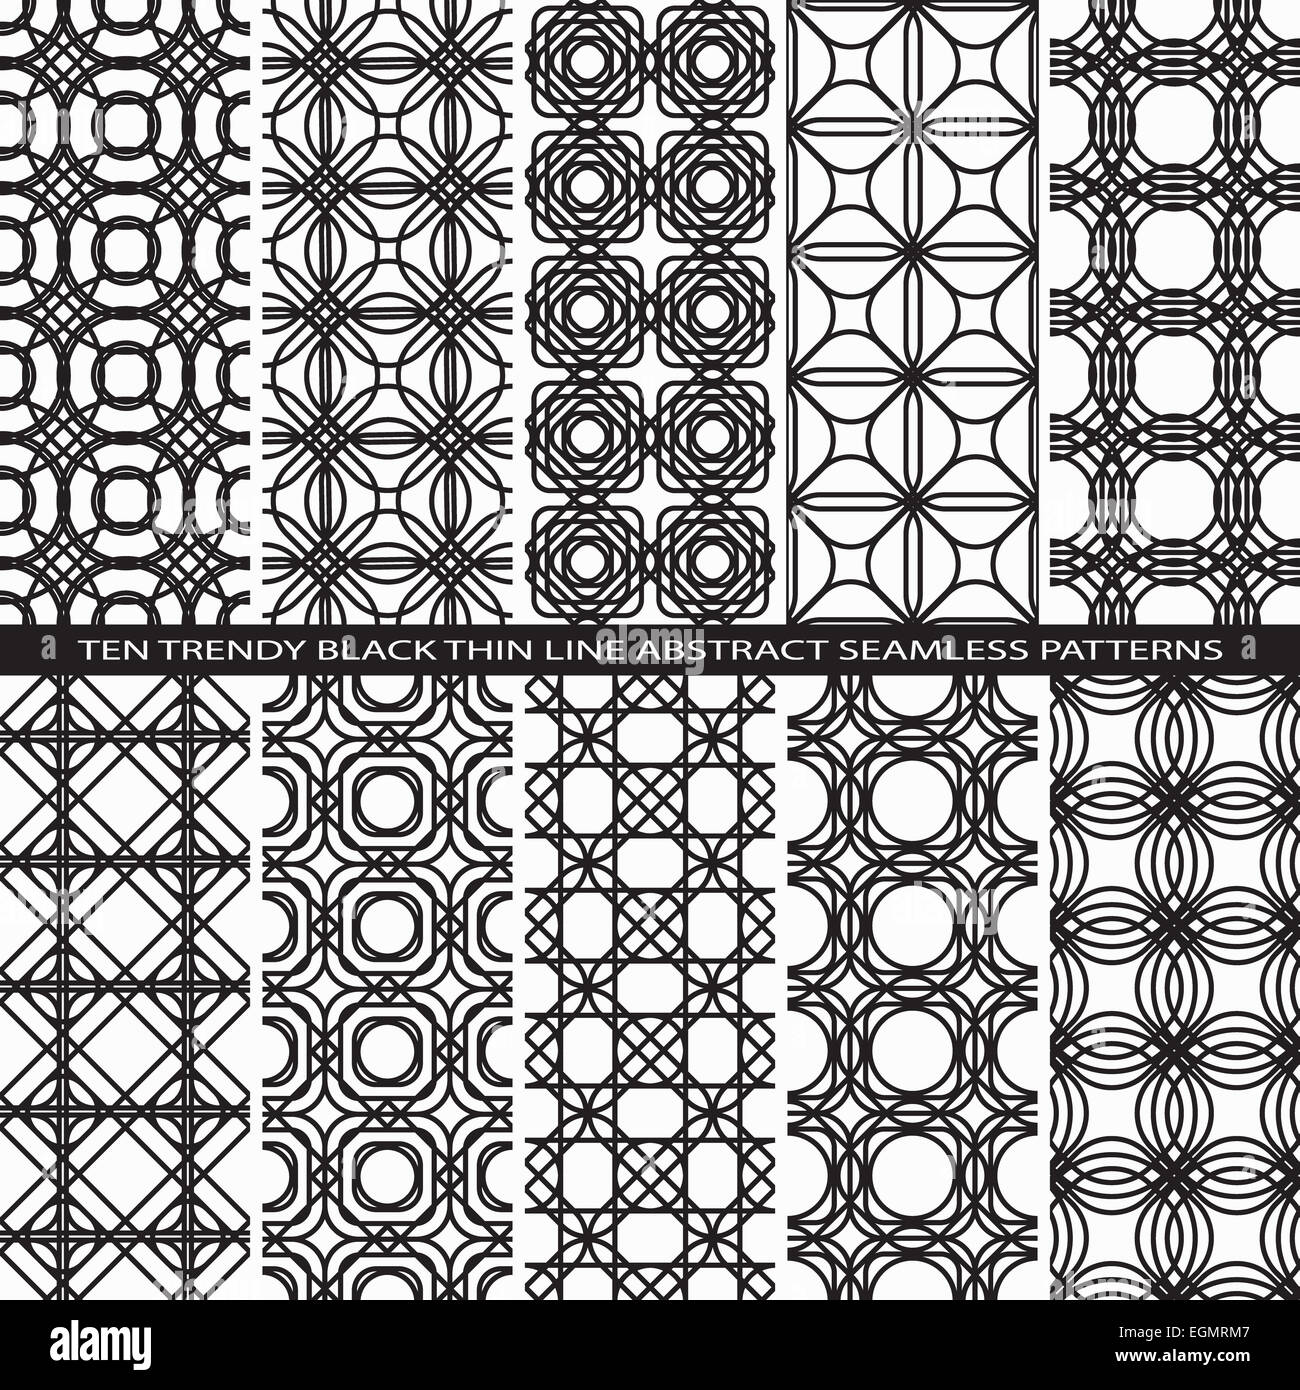 Set of Trendy Vintage Black Thin Line Seamless Pattern Backgrounds with Flower Elements All Present as Endless Texture in Swatch Panel Stock Photo